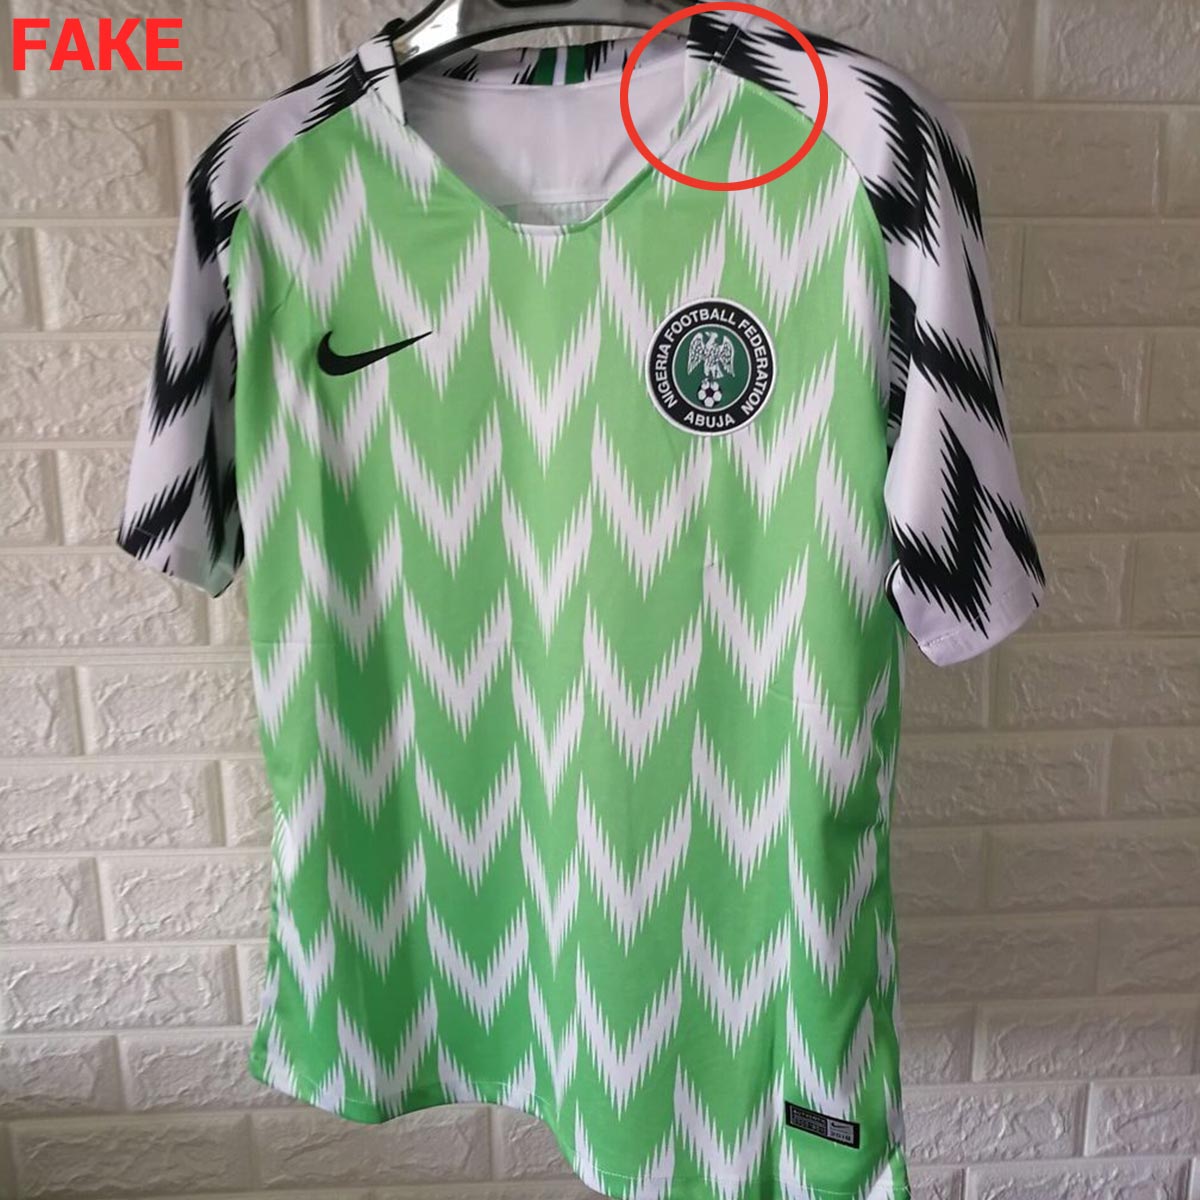 Be Aware - To Detect A Nike Nigeria 2018 World Cup Kit - Headlines